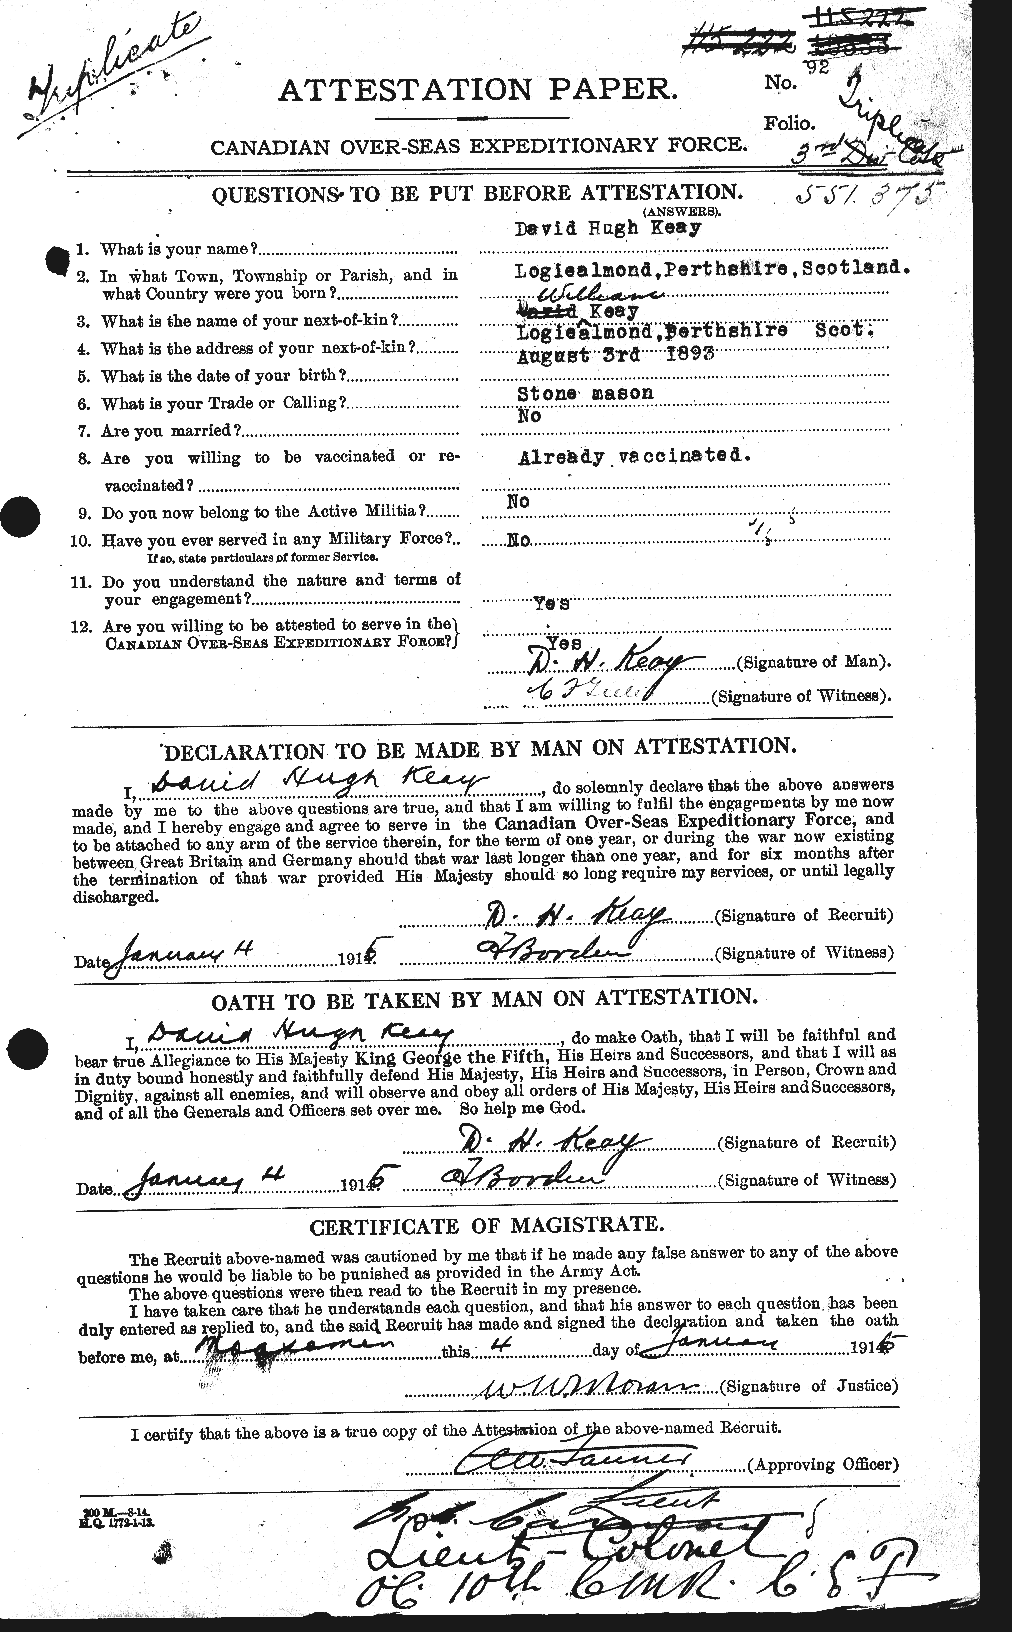 Personnel Records of the First World War - CEF 429376a